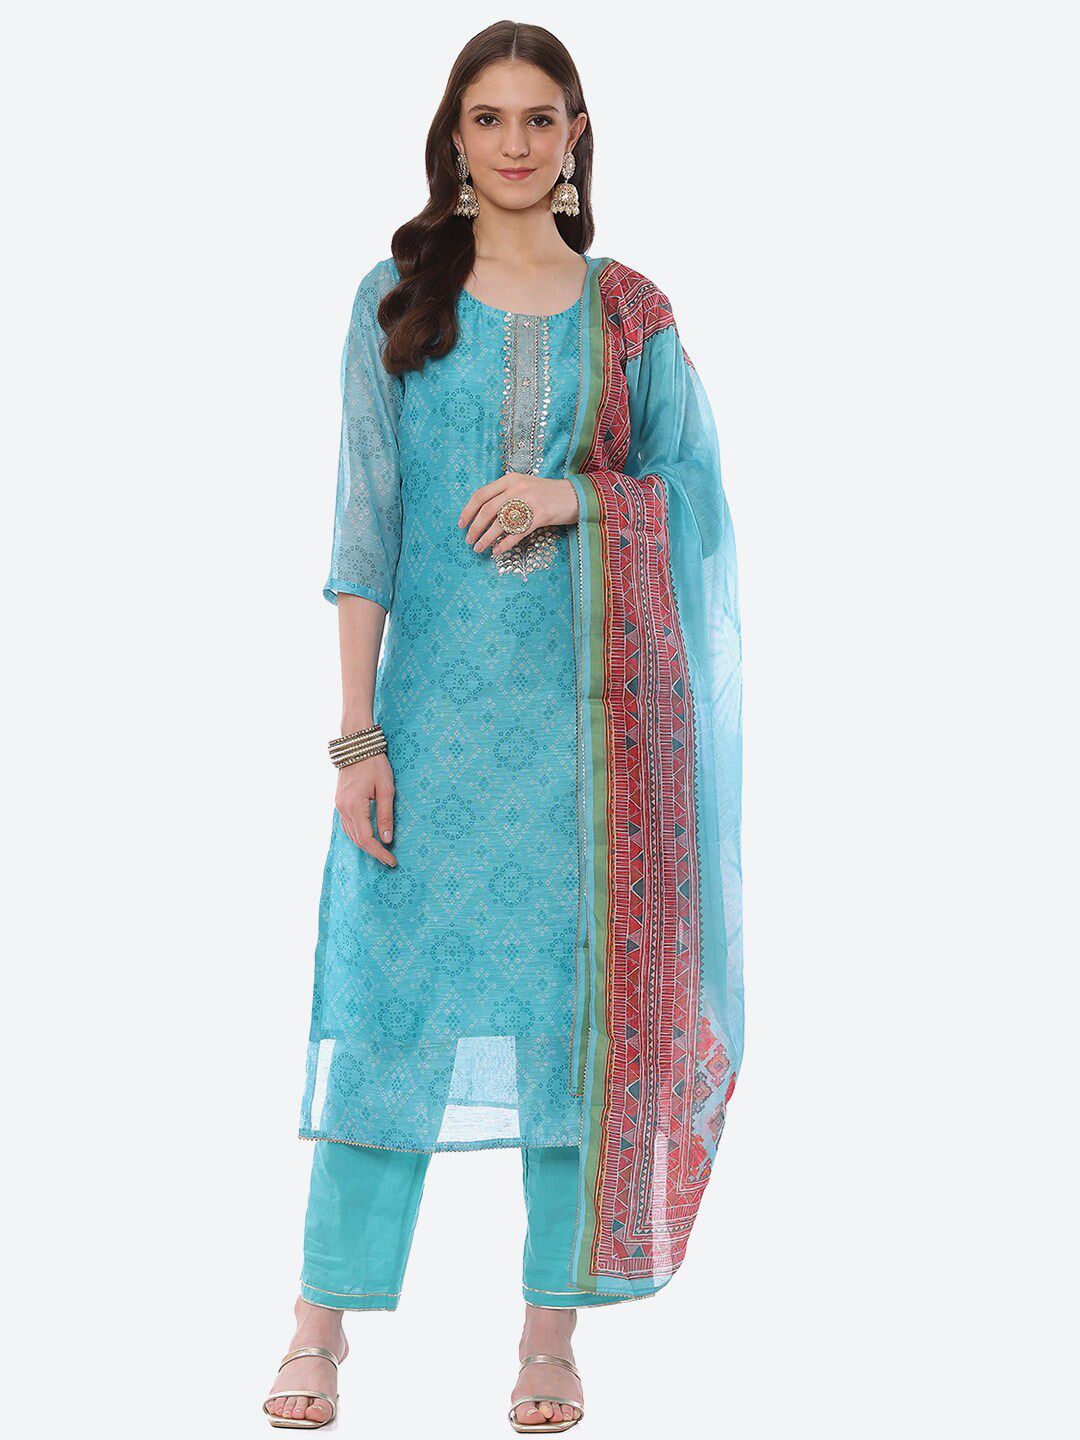 Biba Blue & Red Printed Unstitched Dress Material Price in India